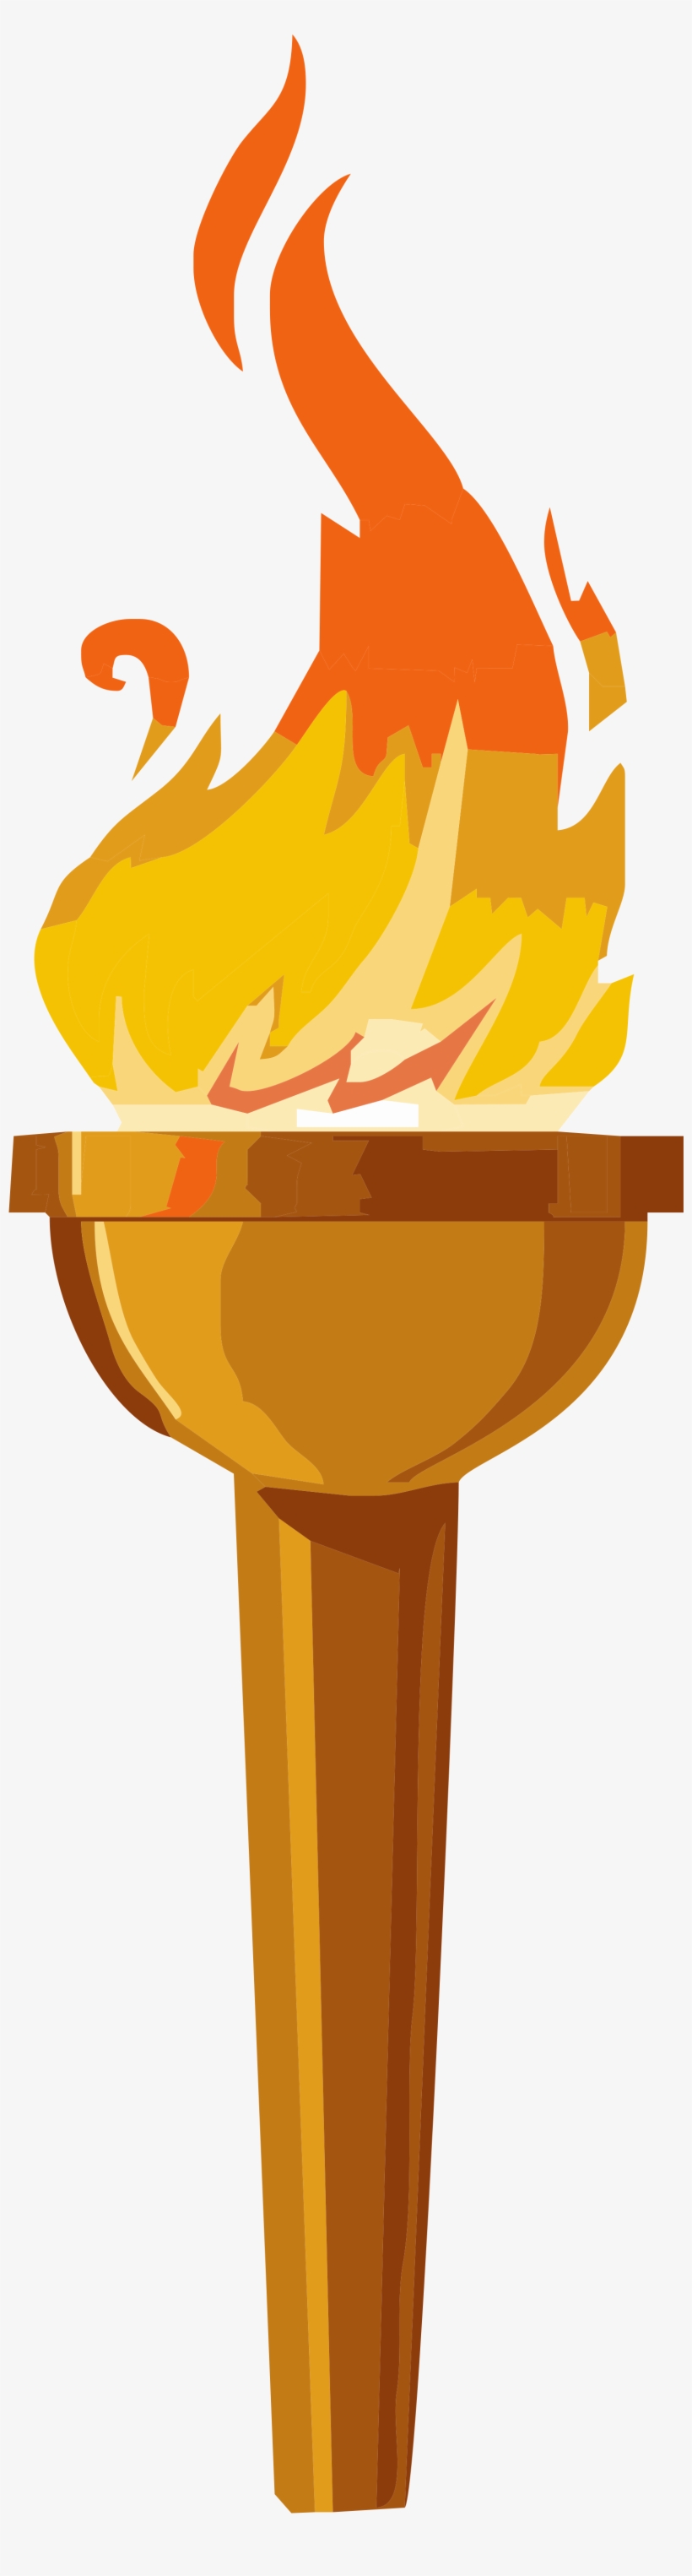 Transparent Png Torch - Olympic Torch Clip Art, transparent png #196262